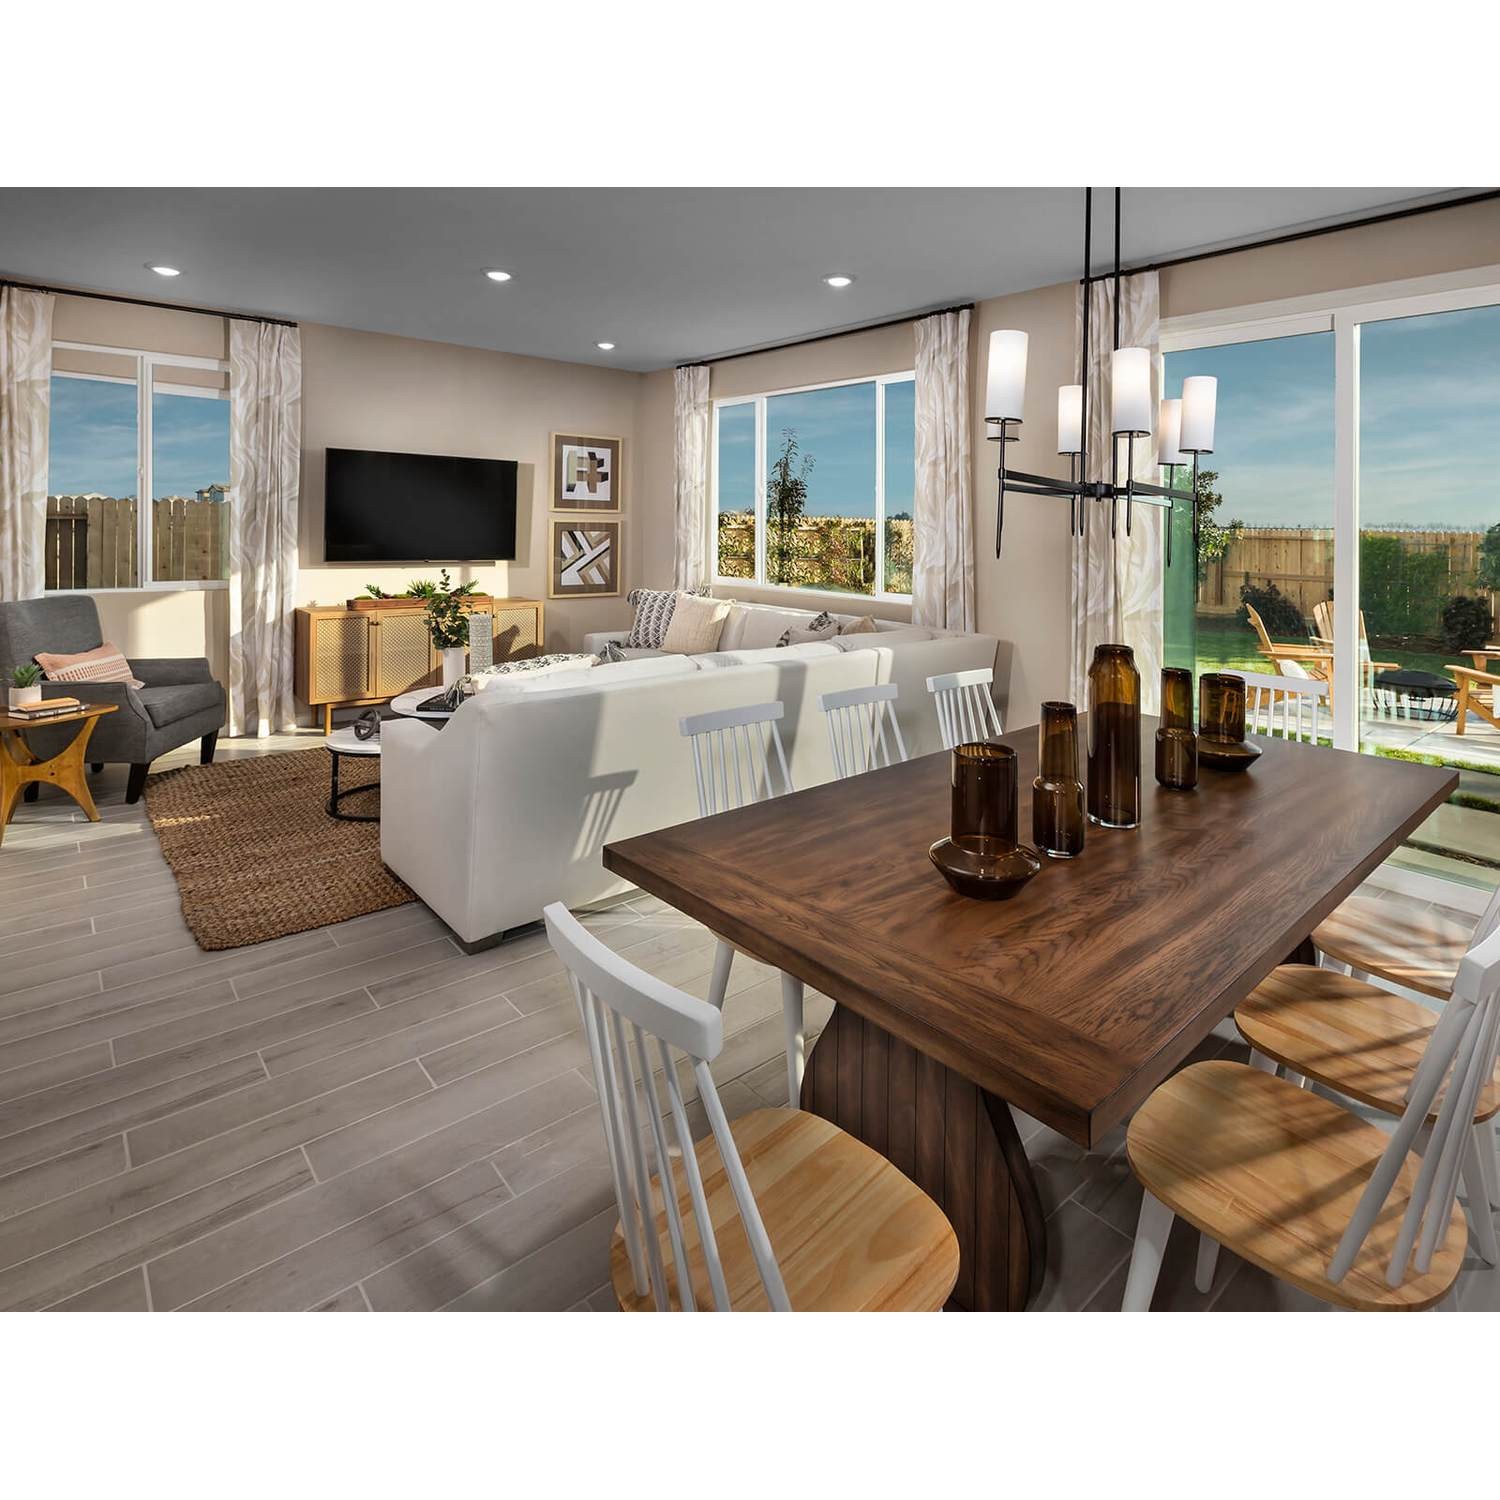 2. Now Pre-Selling From Roam At Winding Creek: 5056 Grasscreek Dr.